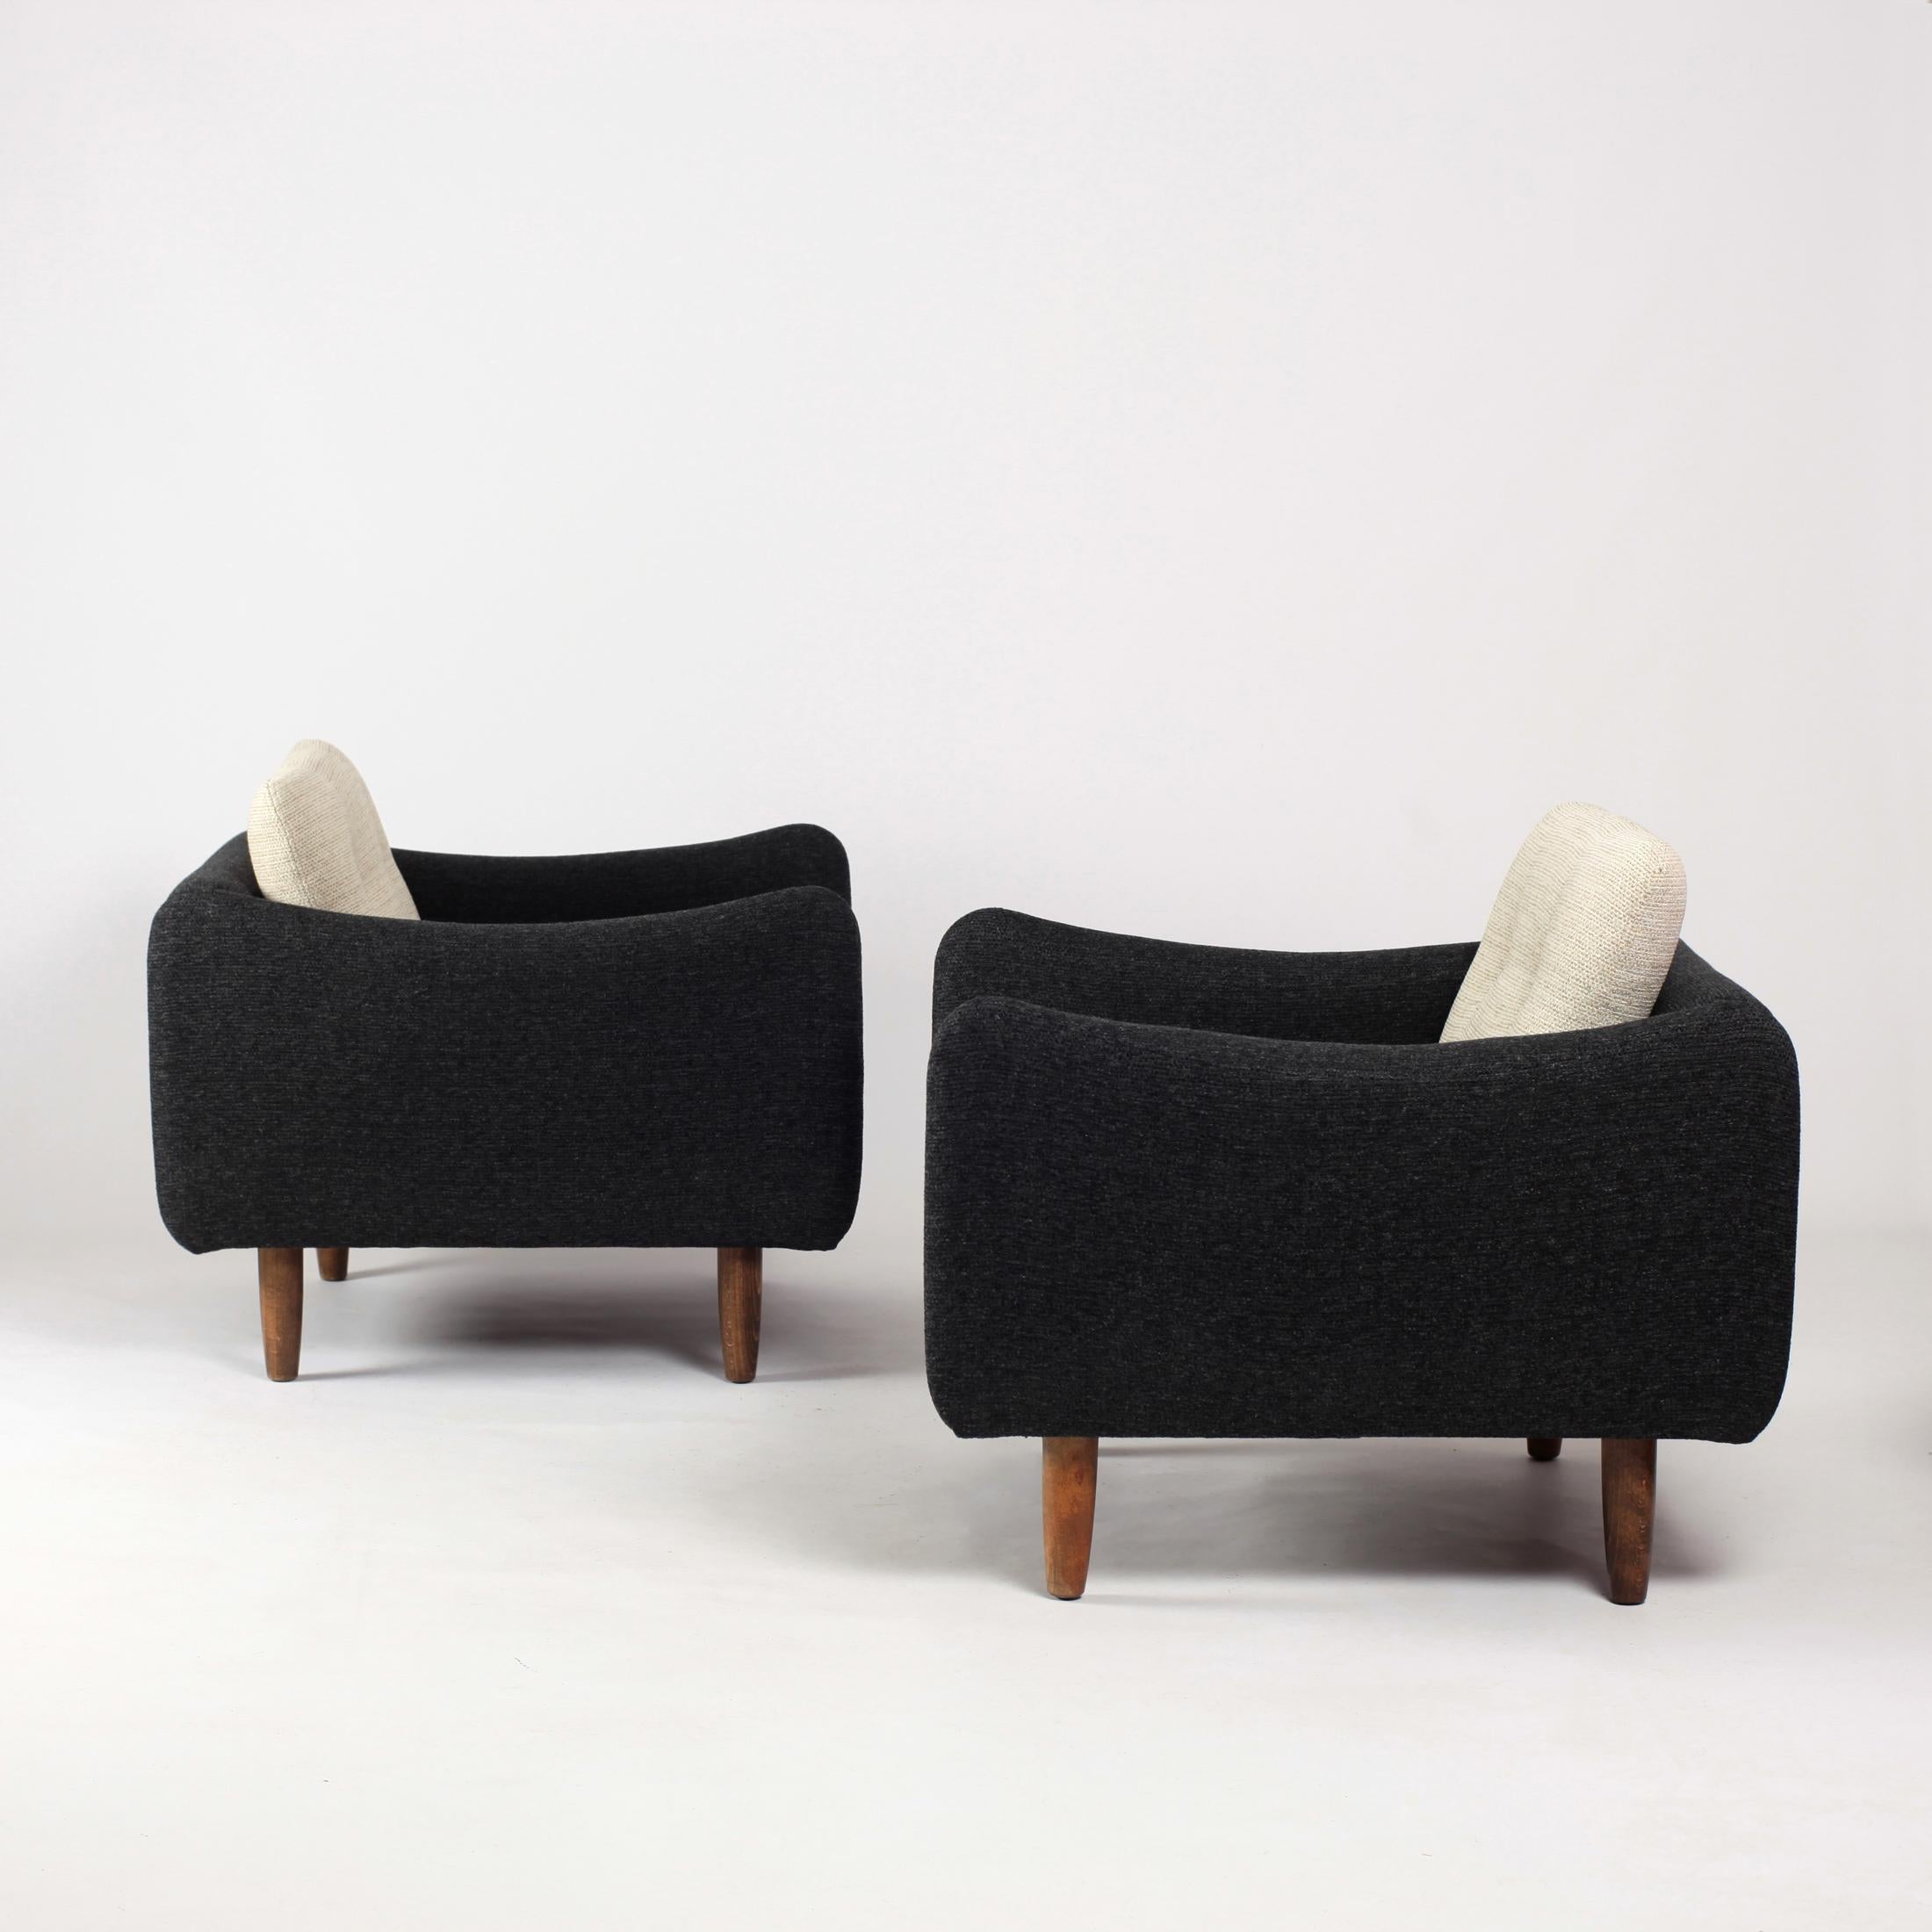 Nice Michel Mortier Teckel or SF116 pair of armchairs for Steiner designed in 1963,
newly upholstered in beautiful Kvadrat fabric.
The metal label of the manufacturer is present on the chairs.